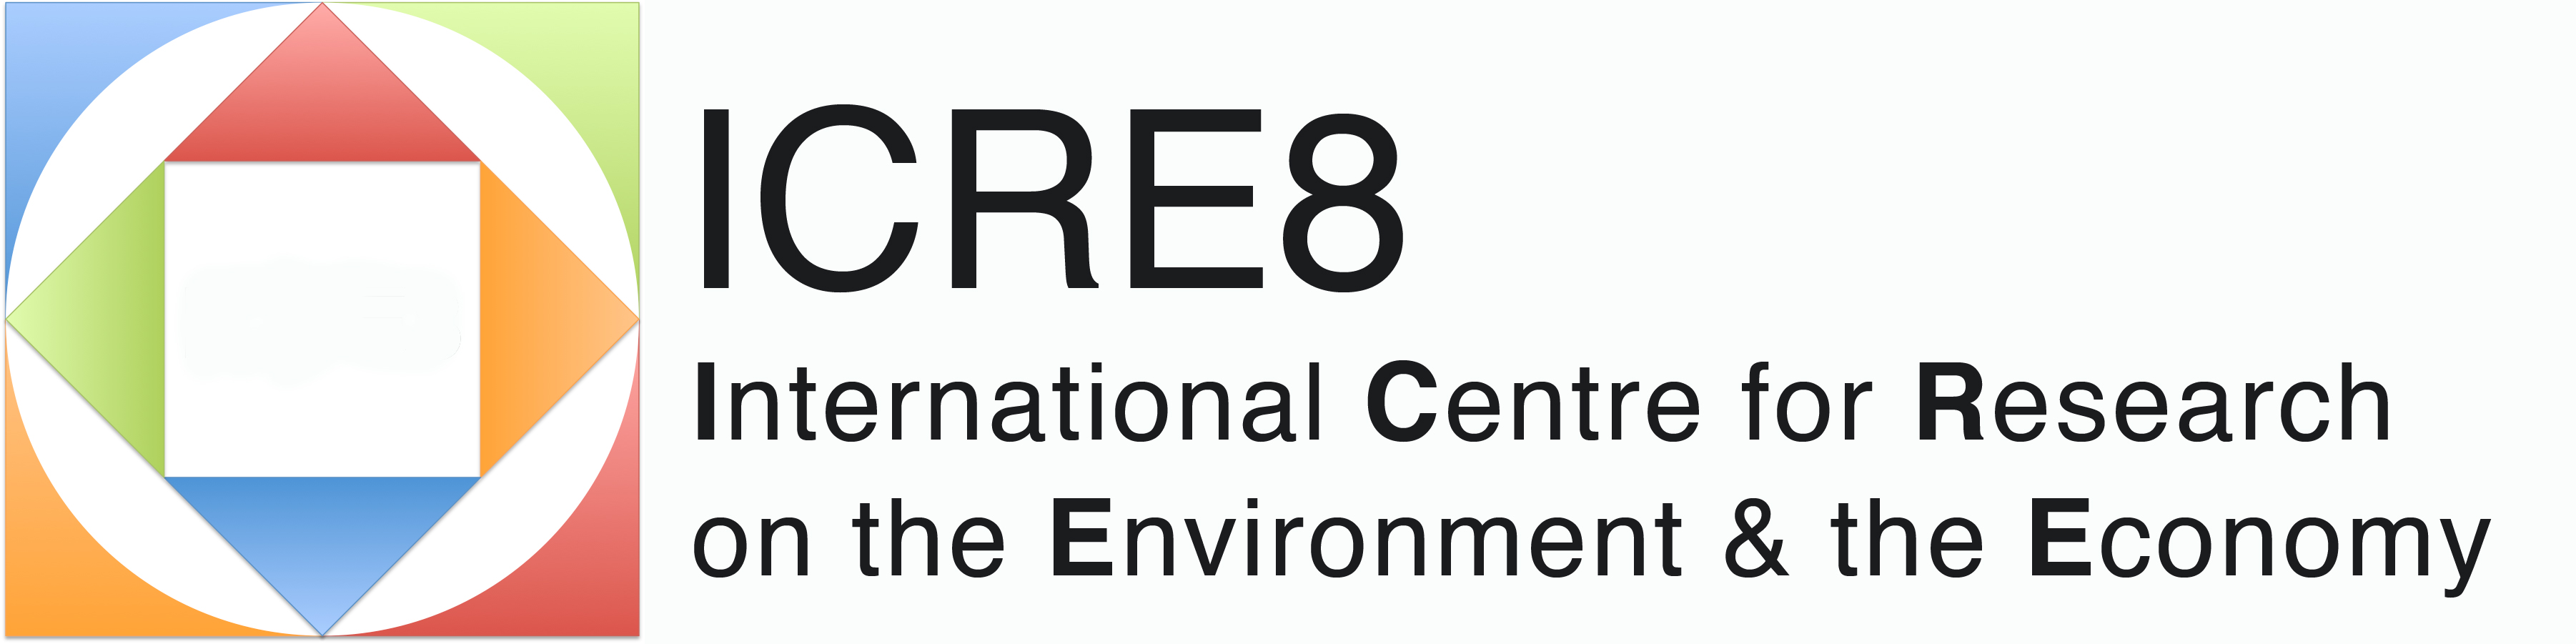 ICRE8